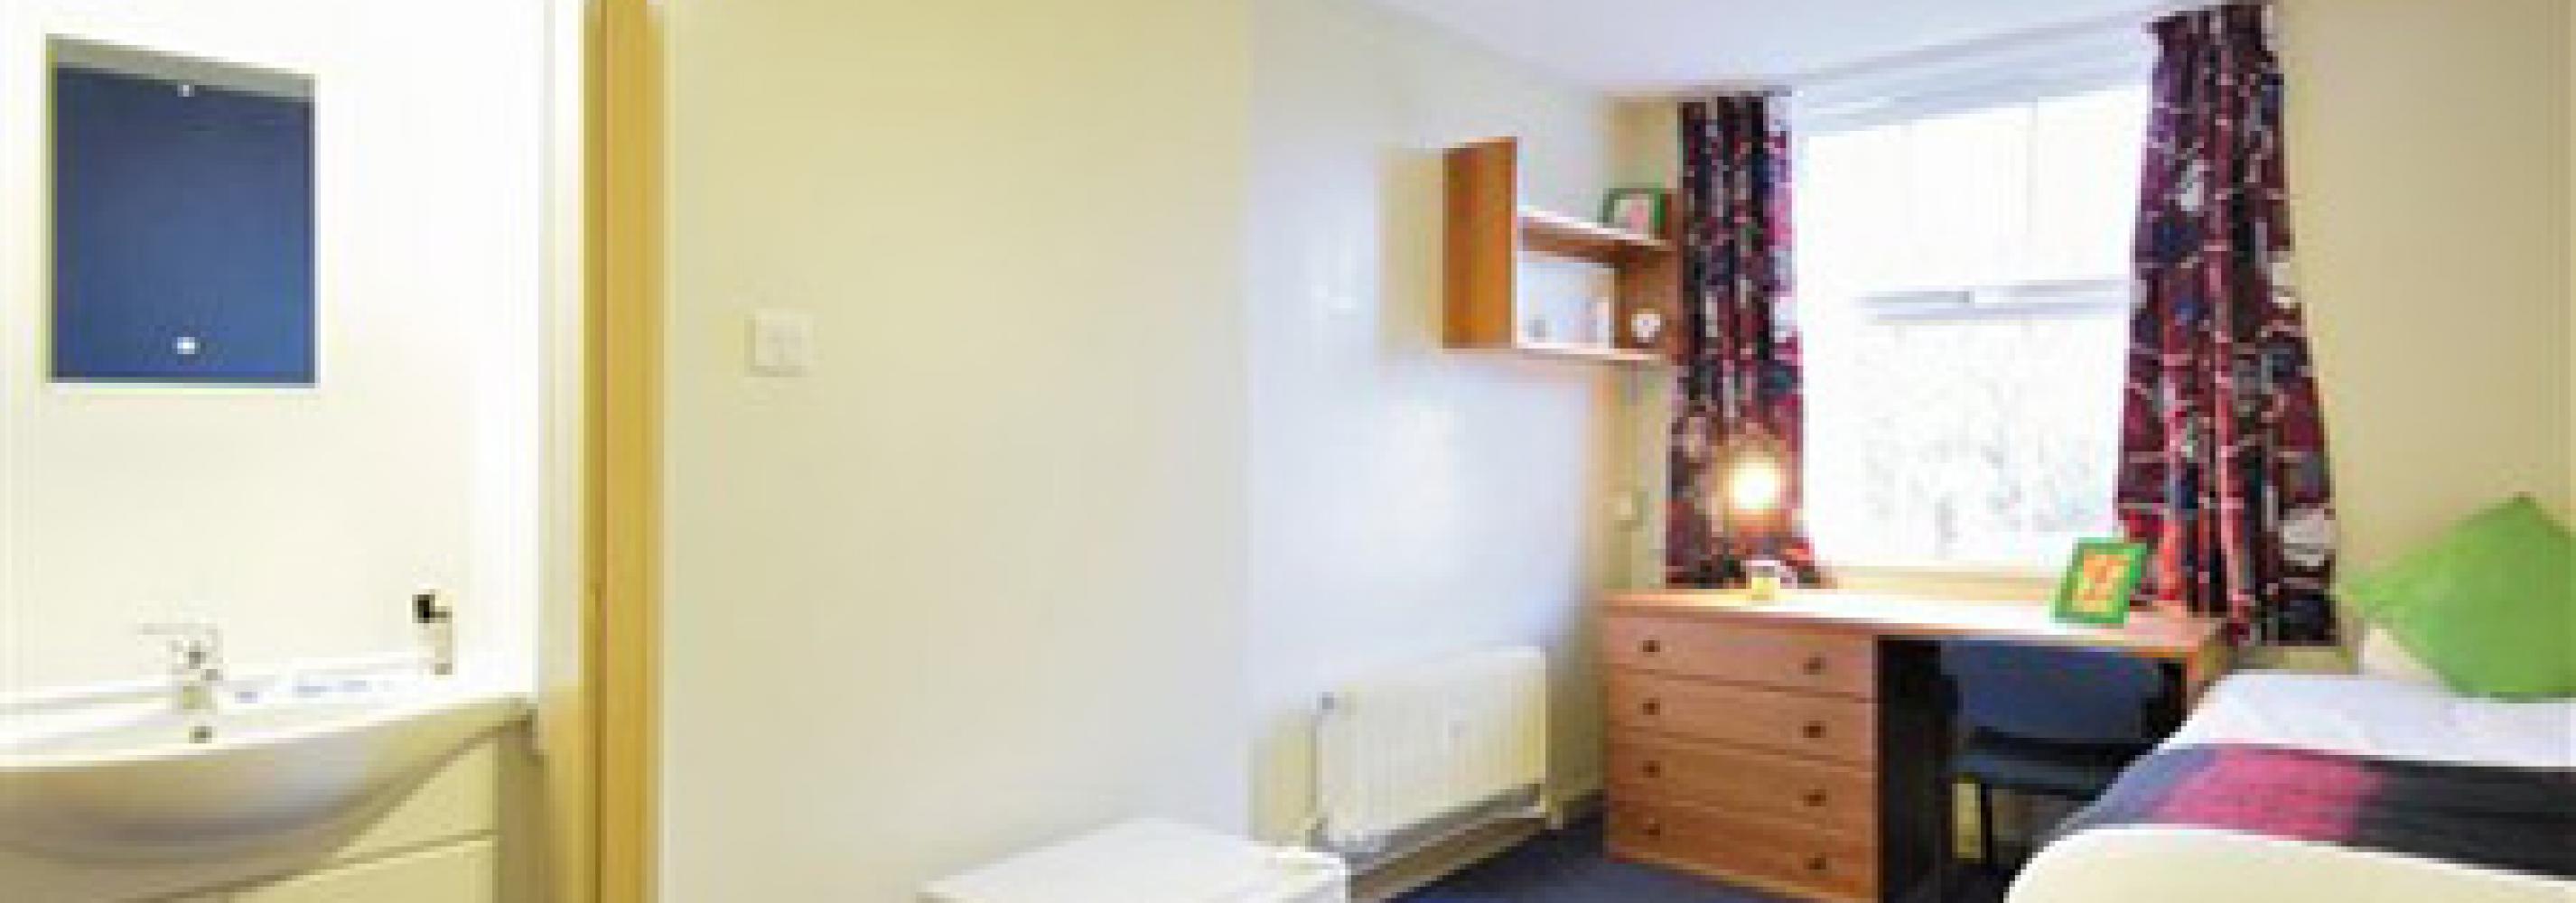 One Bedroom Flat at Willoughby Hall